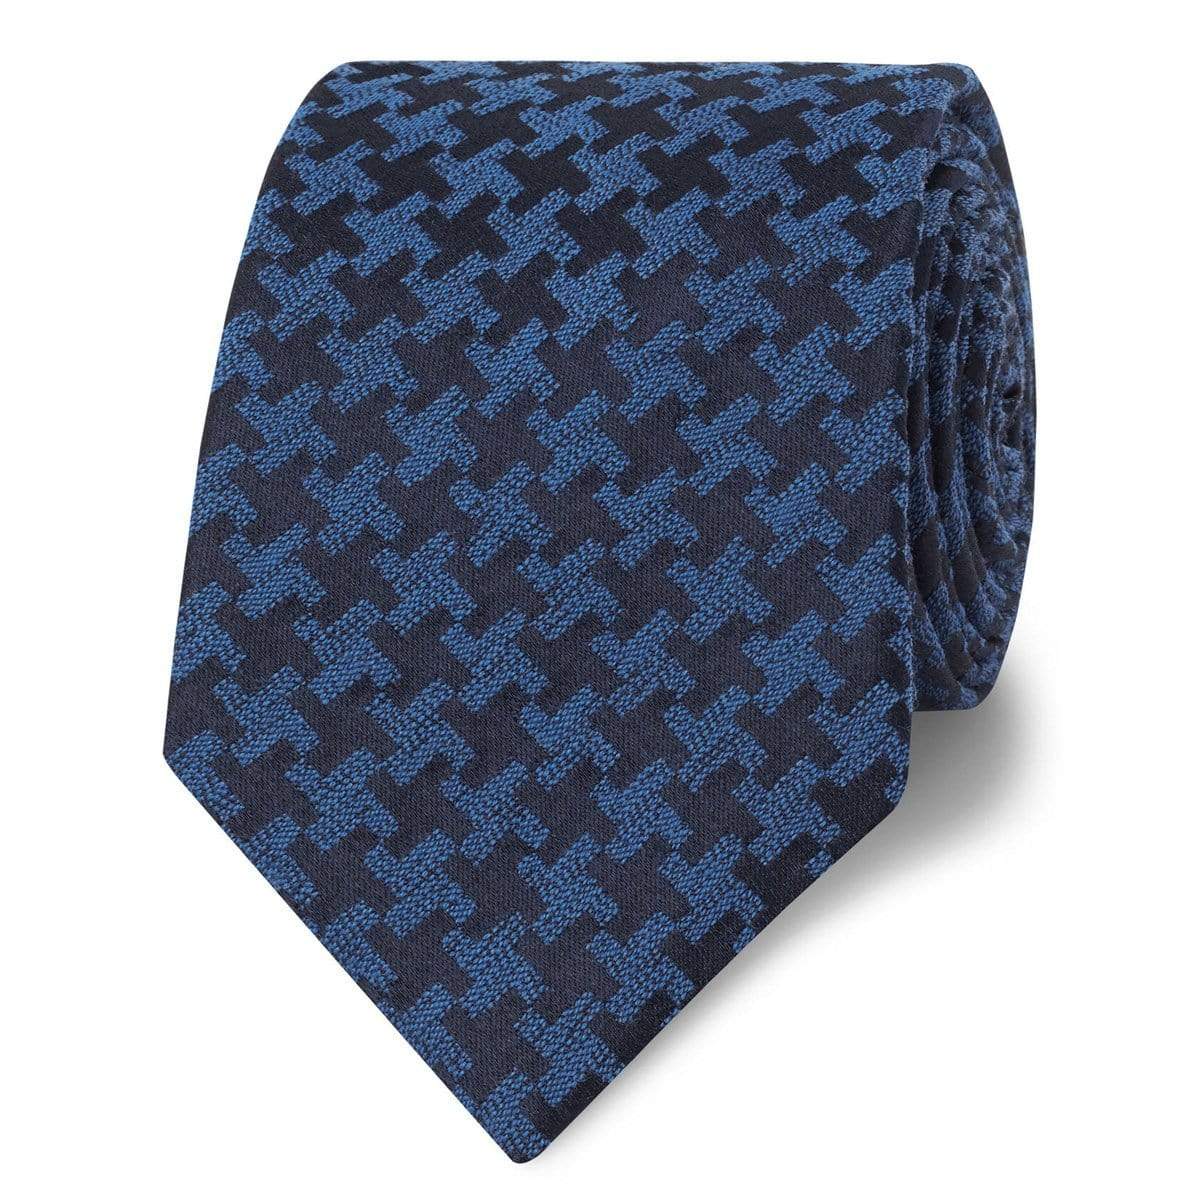 T.M.Lewin-Oversized-Dogtooth-Tie-Navy-and-Blue-61284-002